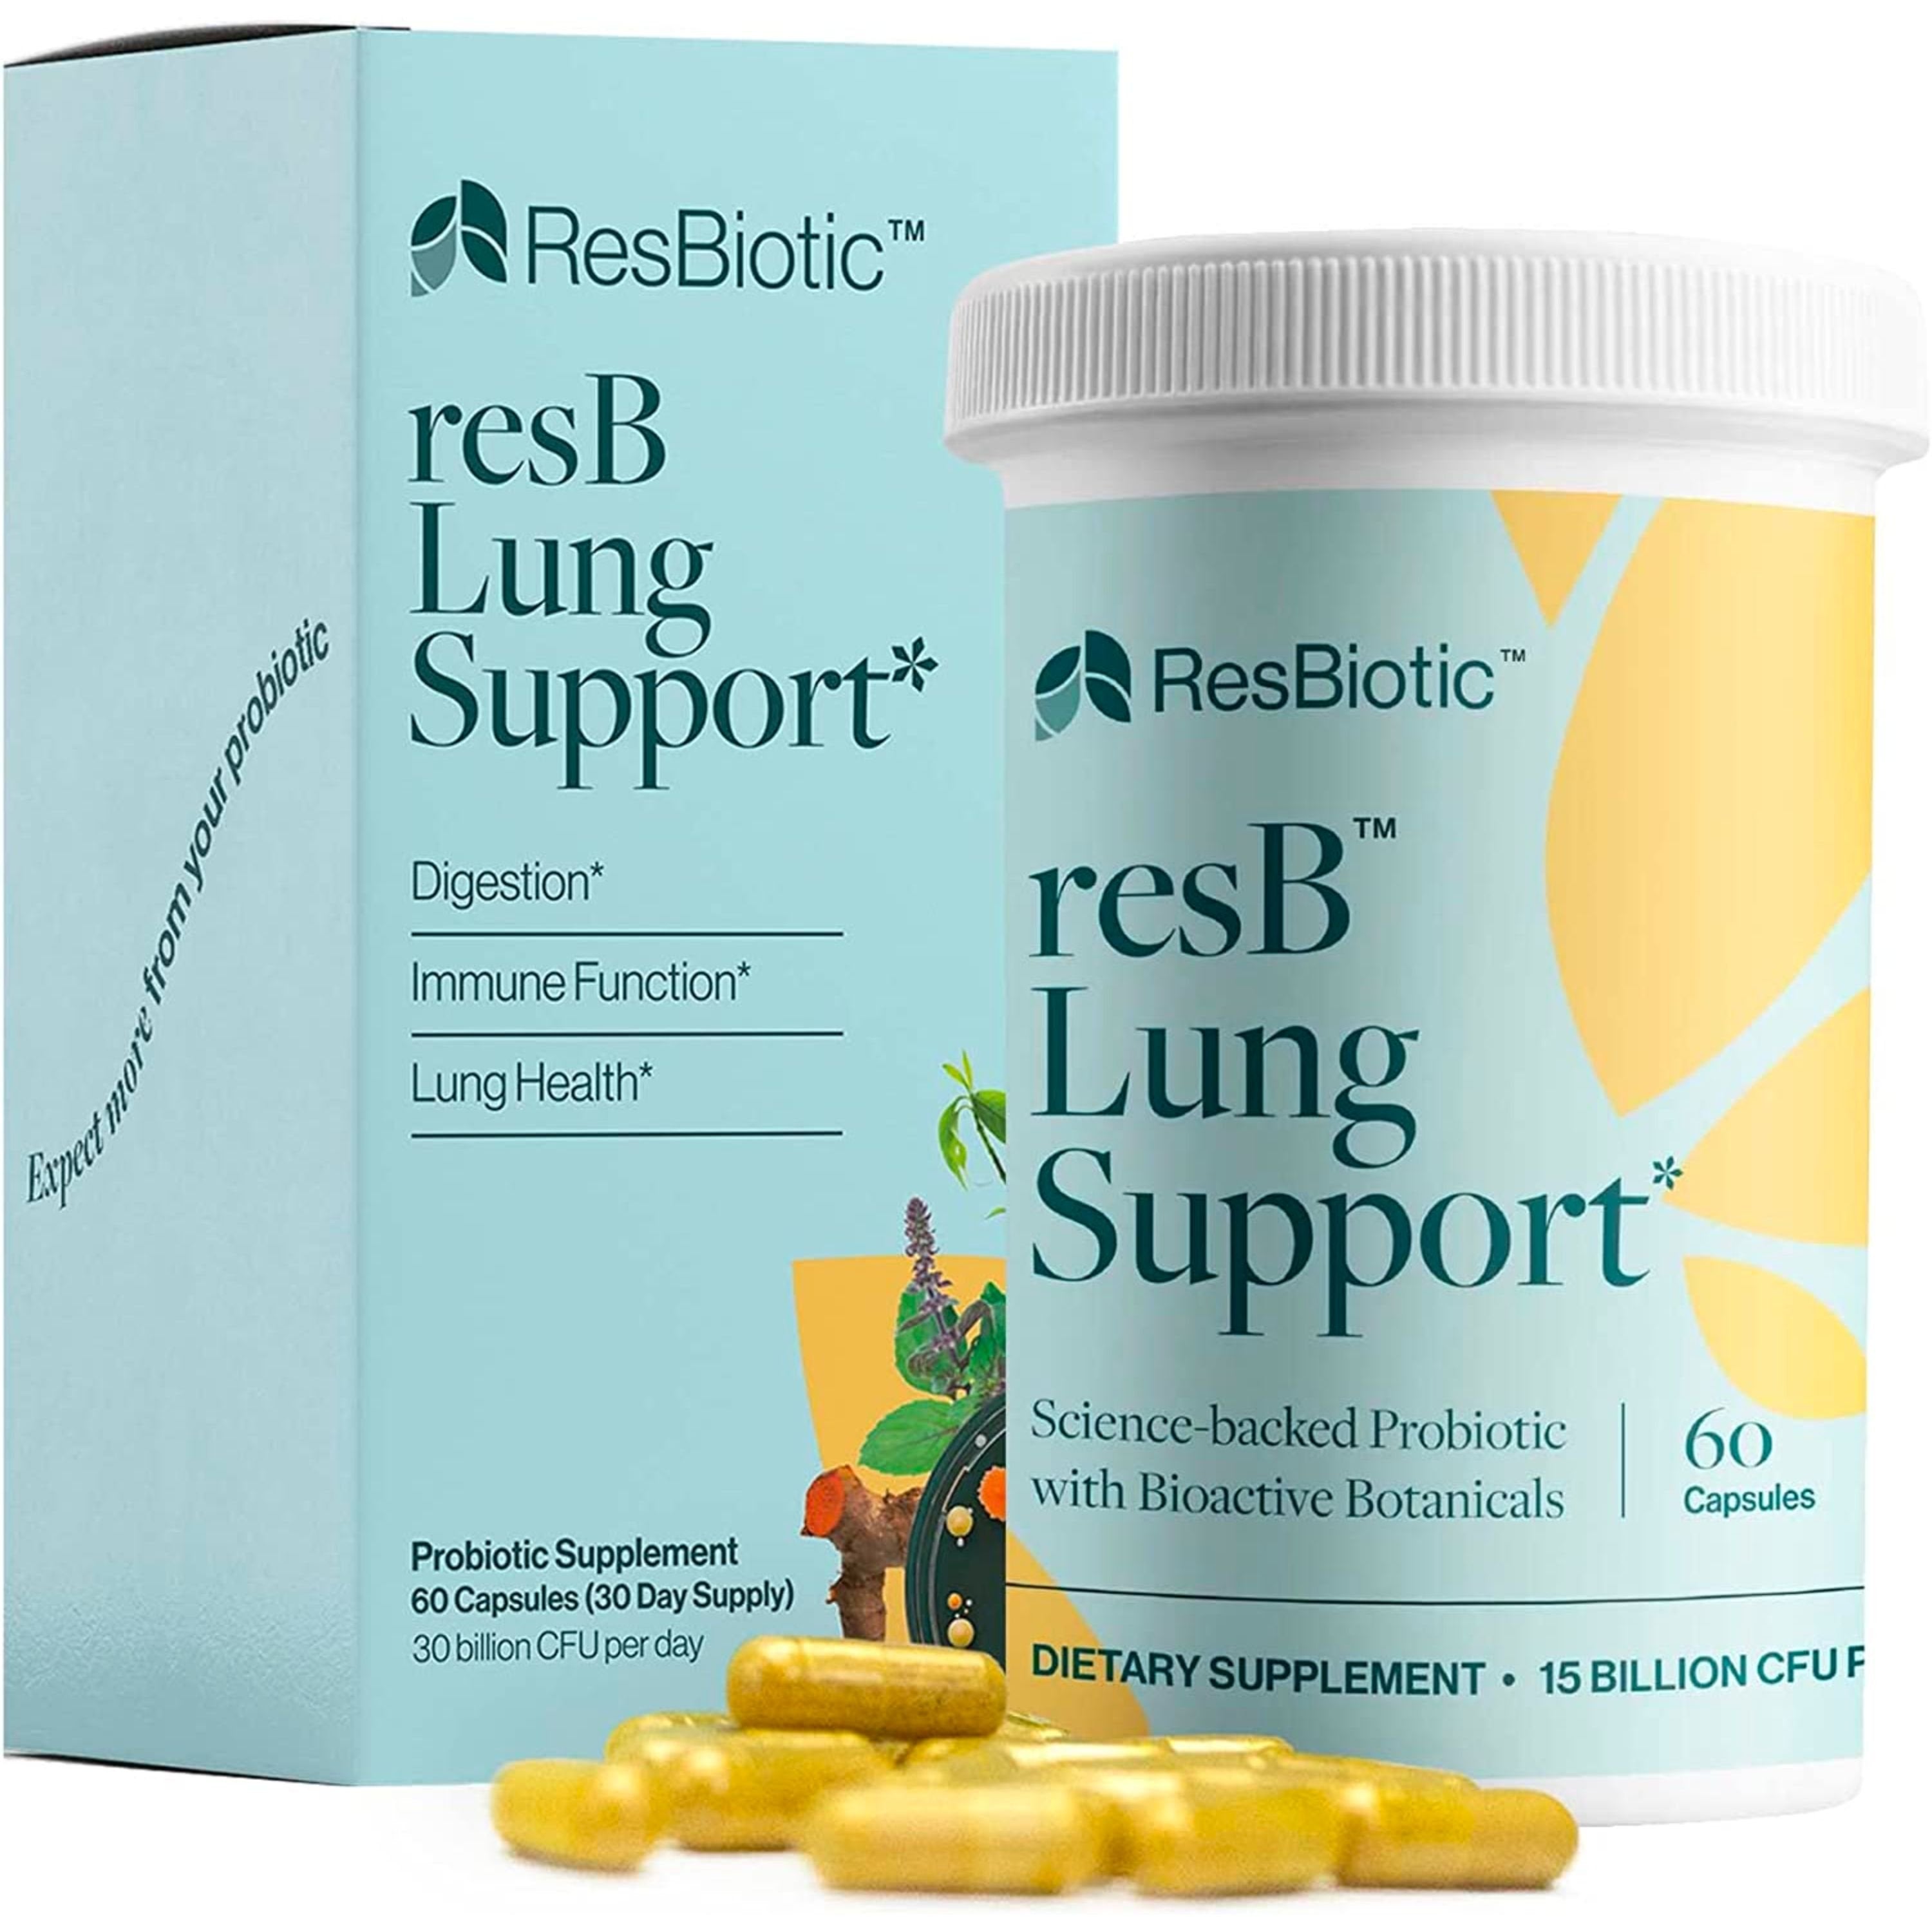 ResBiotic resB Lung Support – Probiotics for Lung Health for Women & Men – Doctor Formulated, Science Backed, Supports Digestion, Immune Function, and Lung Health with Bioactive Botanicals – 60 Capsules per Bottle